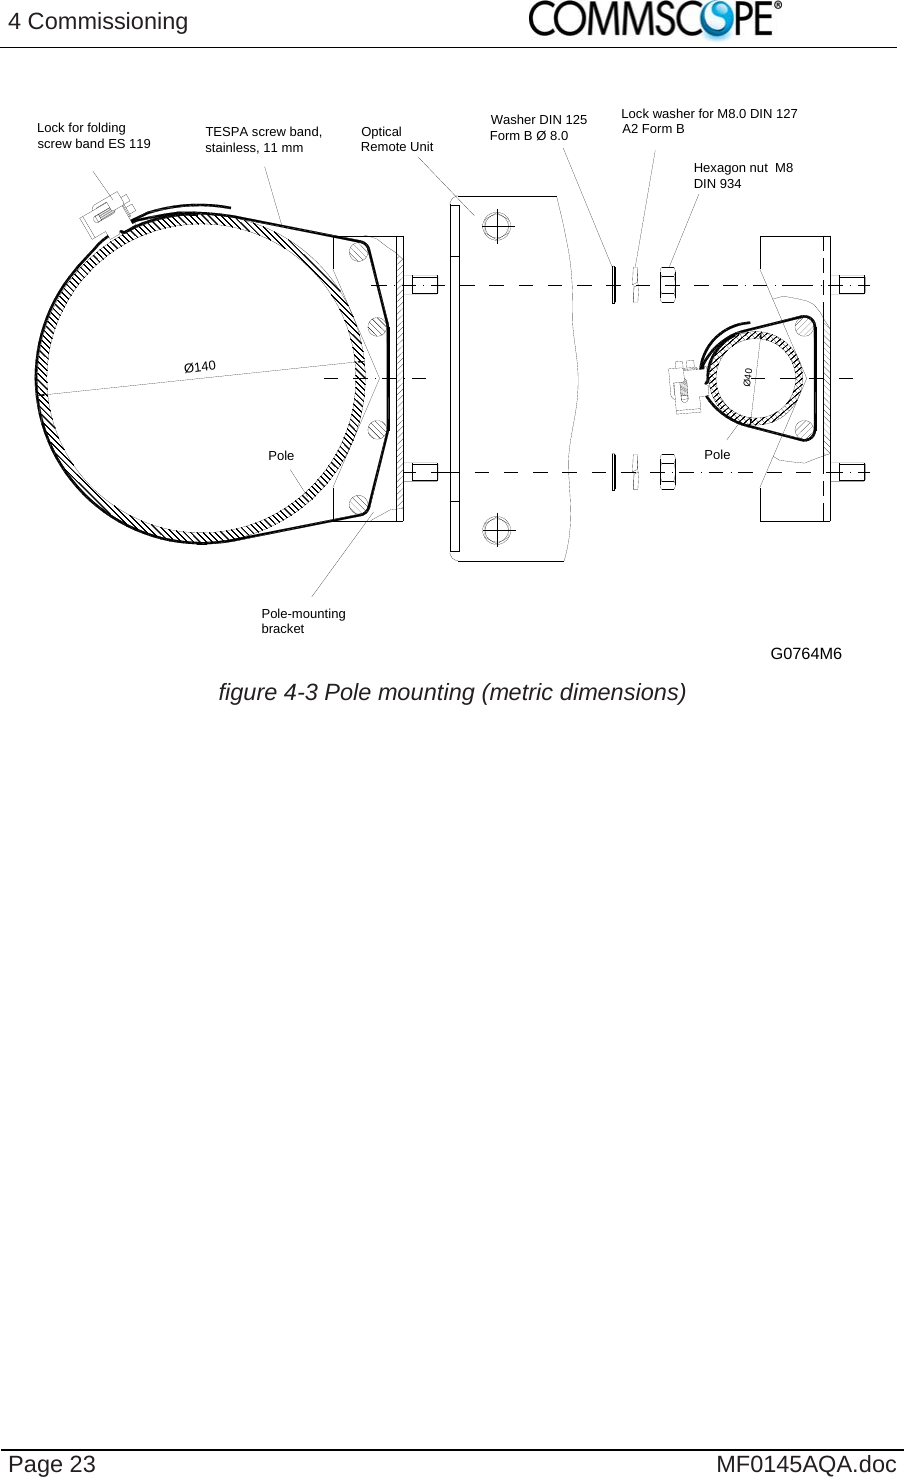 4 Commissioning    Page 23  MF0145AQA.doc  G0764M6Lock for folding screw band ES 119 TESPA screw band, stainless, 11 mm Optical Remote UnitWasher DIN 125 Form B Ø 8.0Lock washer for M8.0 DIN 127 A2 Form B Hexagon nut  M8 DIN 934PolePolePole-mounting bracketØ140Ø40 figure 4-3 Pole mounting (metric dimensions)   